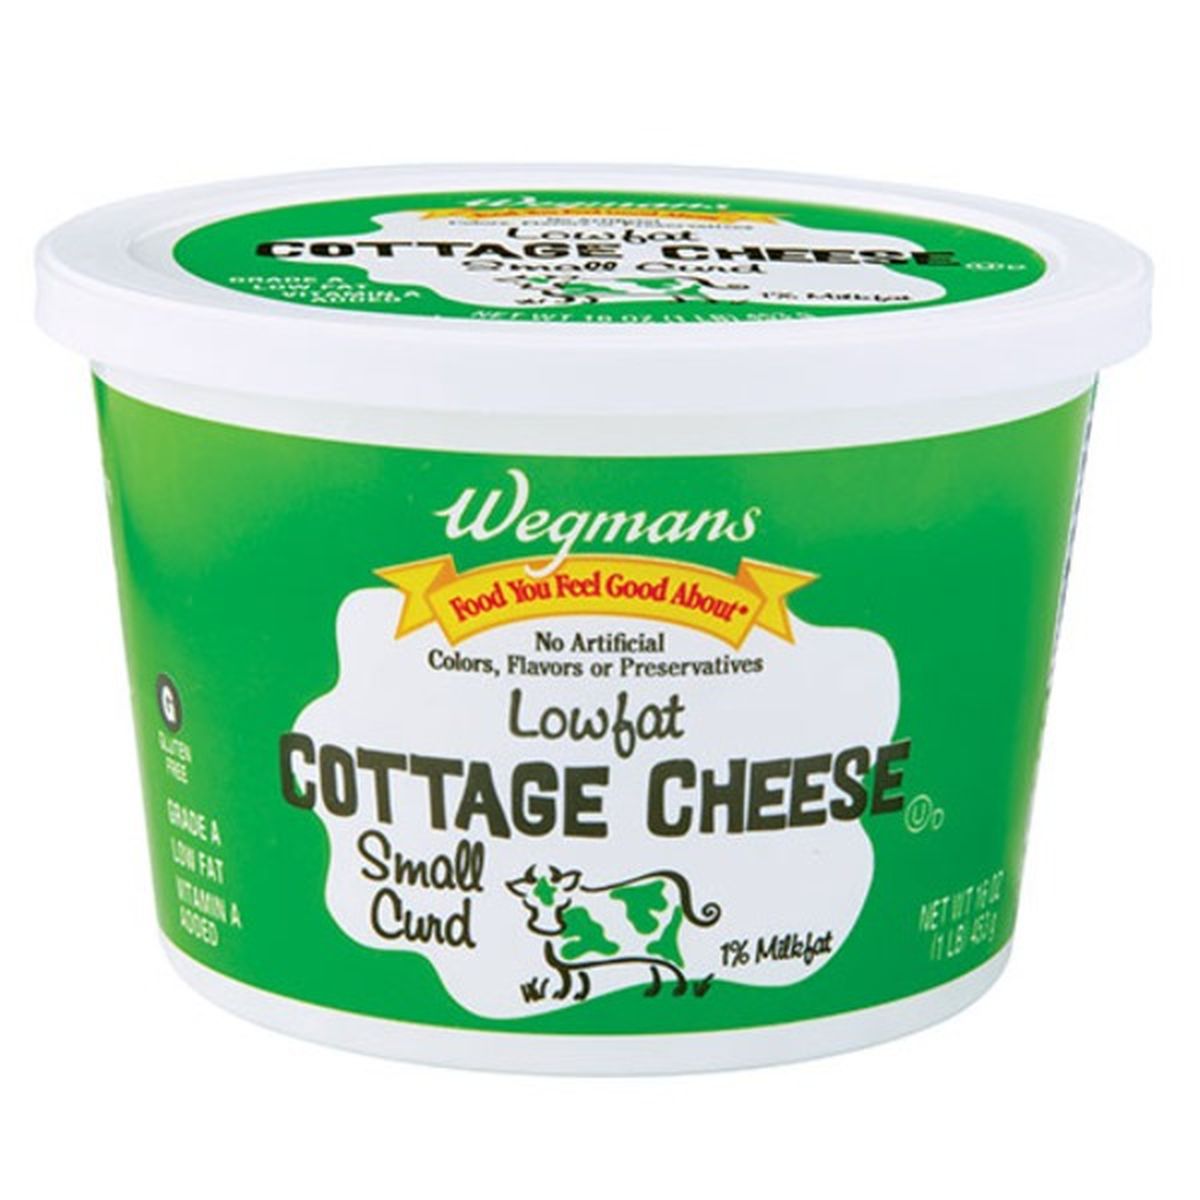 Calories in Wegmans Lowfat Small Curd Cottage Cheese, 1% Milkfat